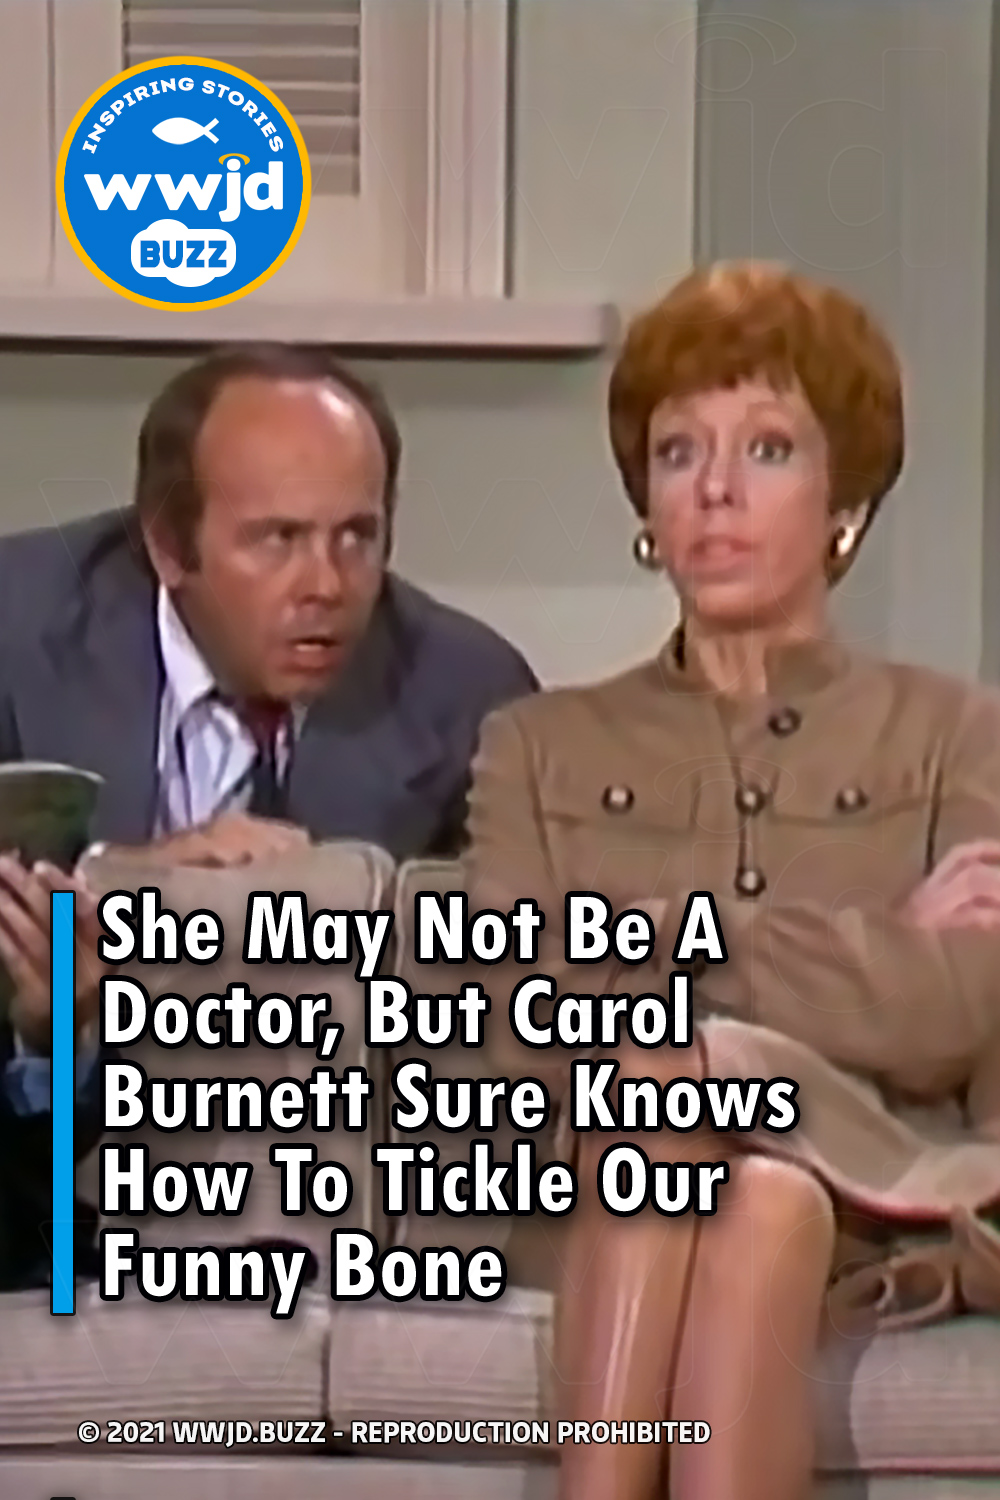 She May Not Be A Doctor, But Carol Burnett Sure Knows How To Tickle Our Funny Bone